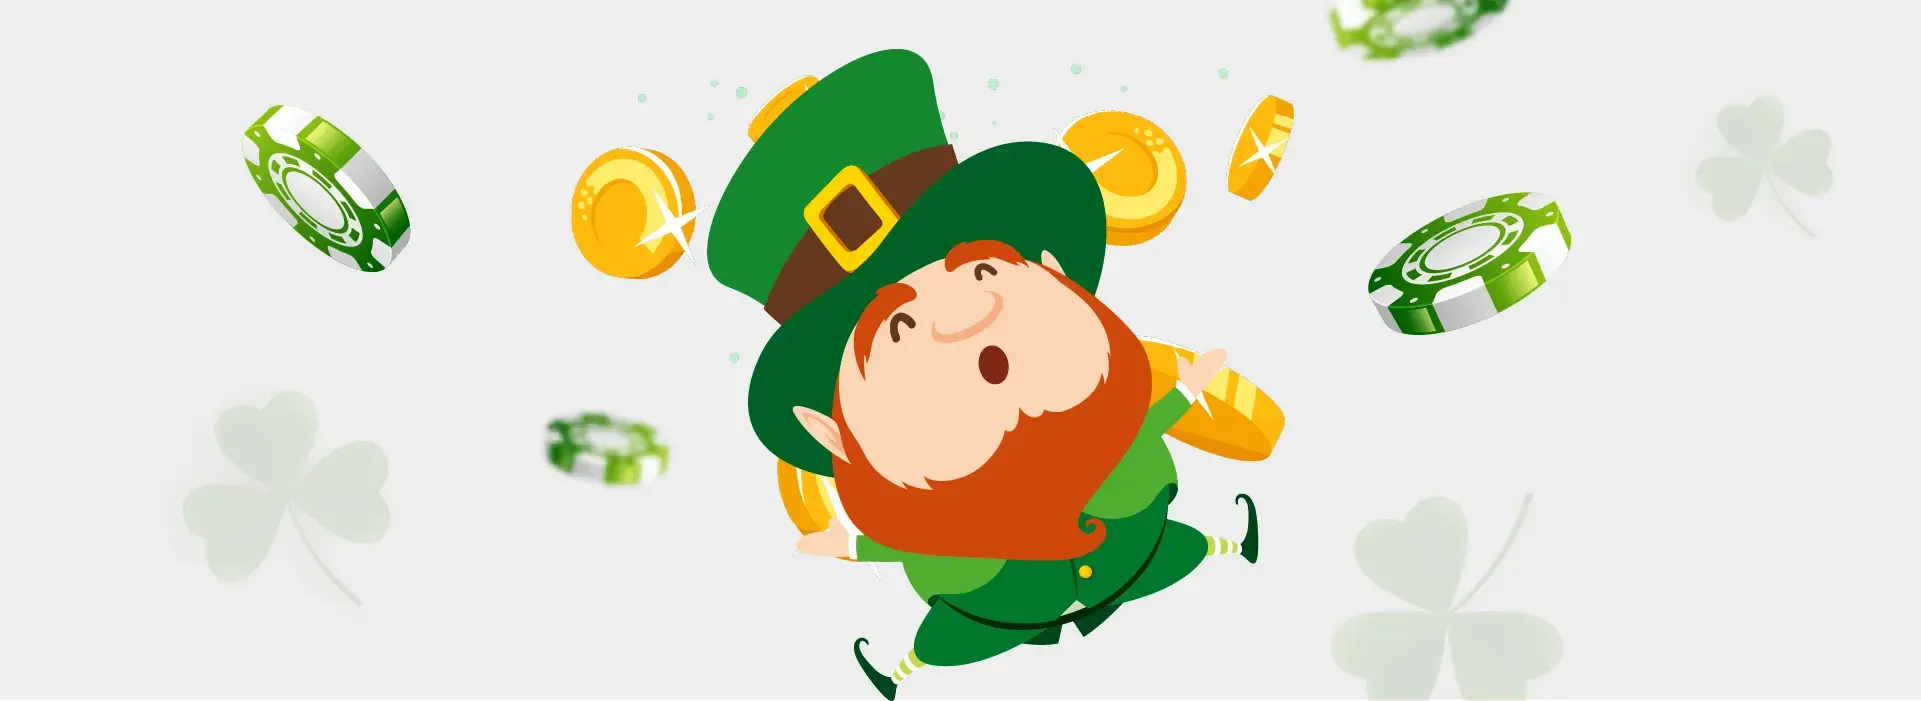 leprecon irishluck dancing with casino and roulette chips